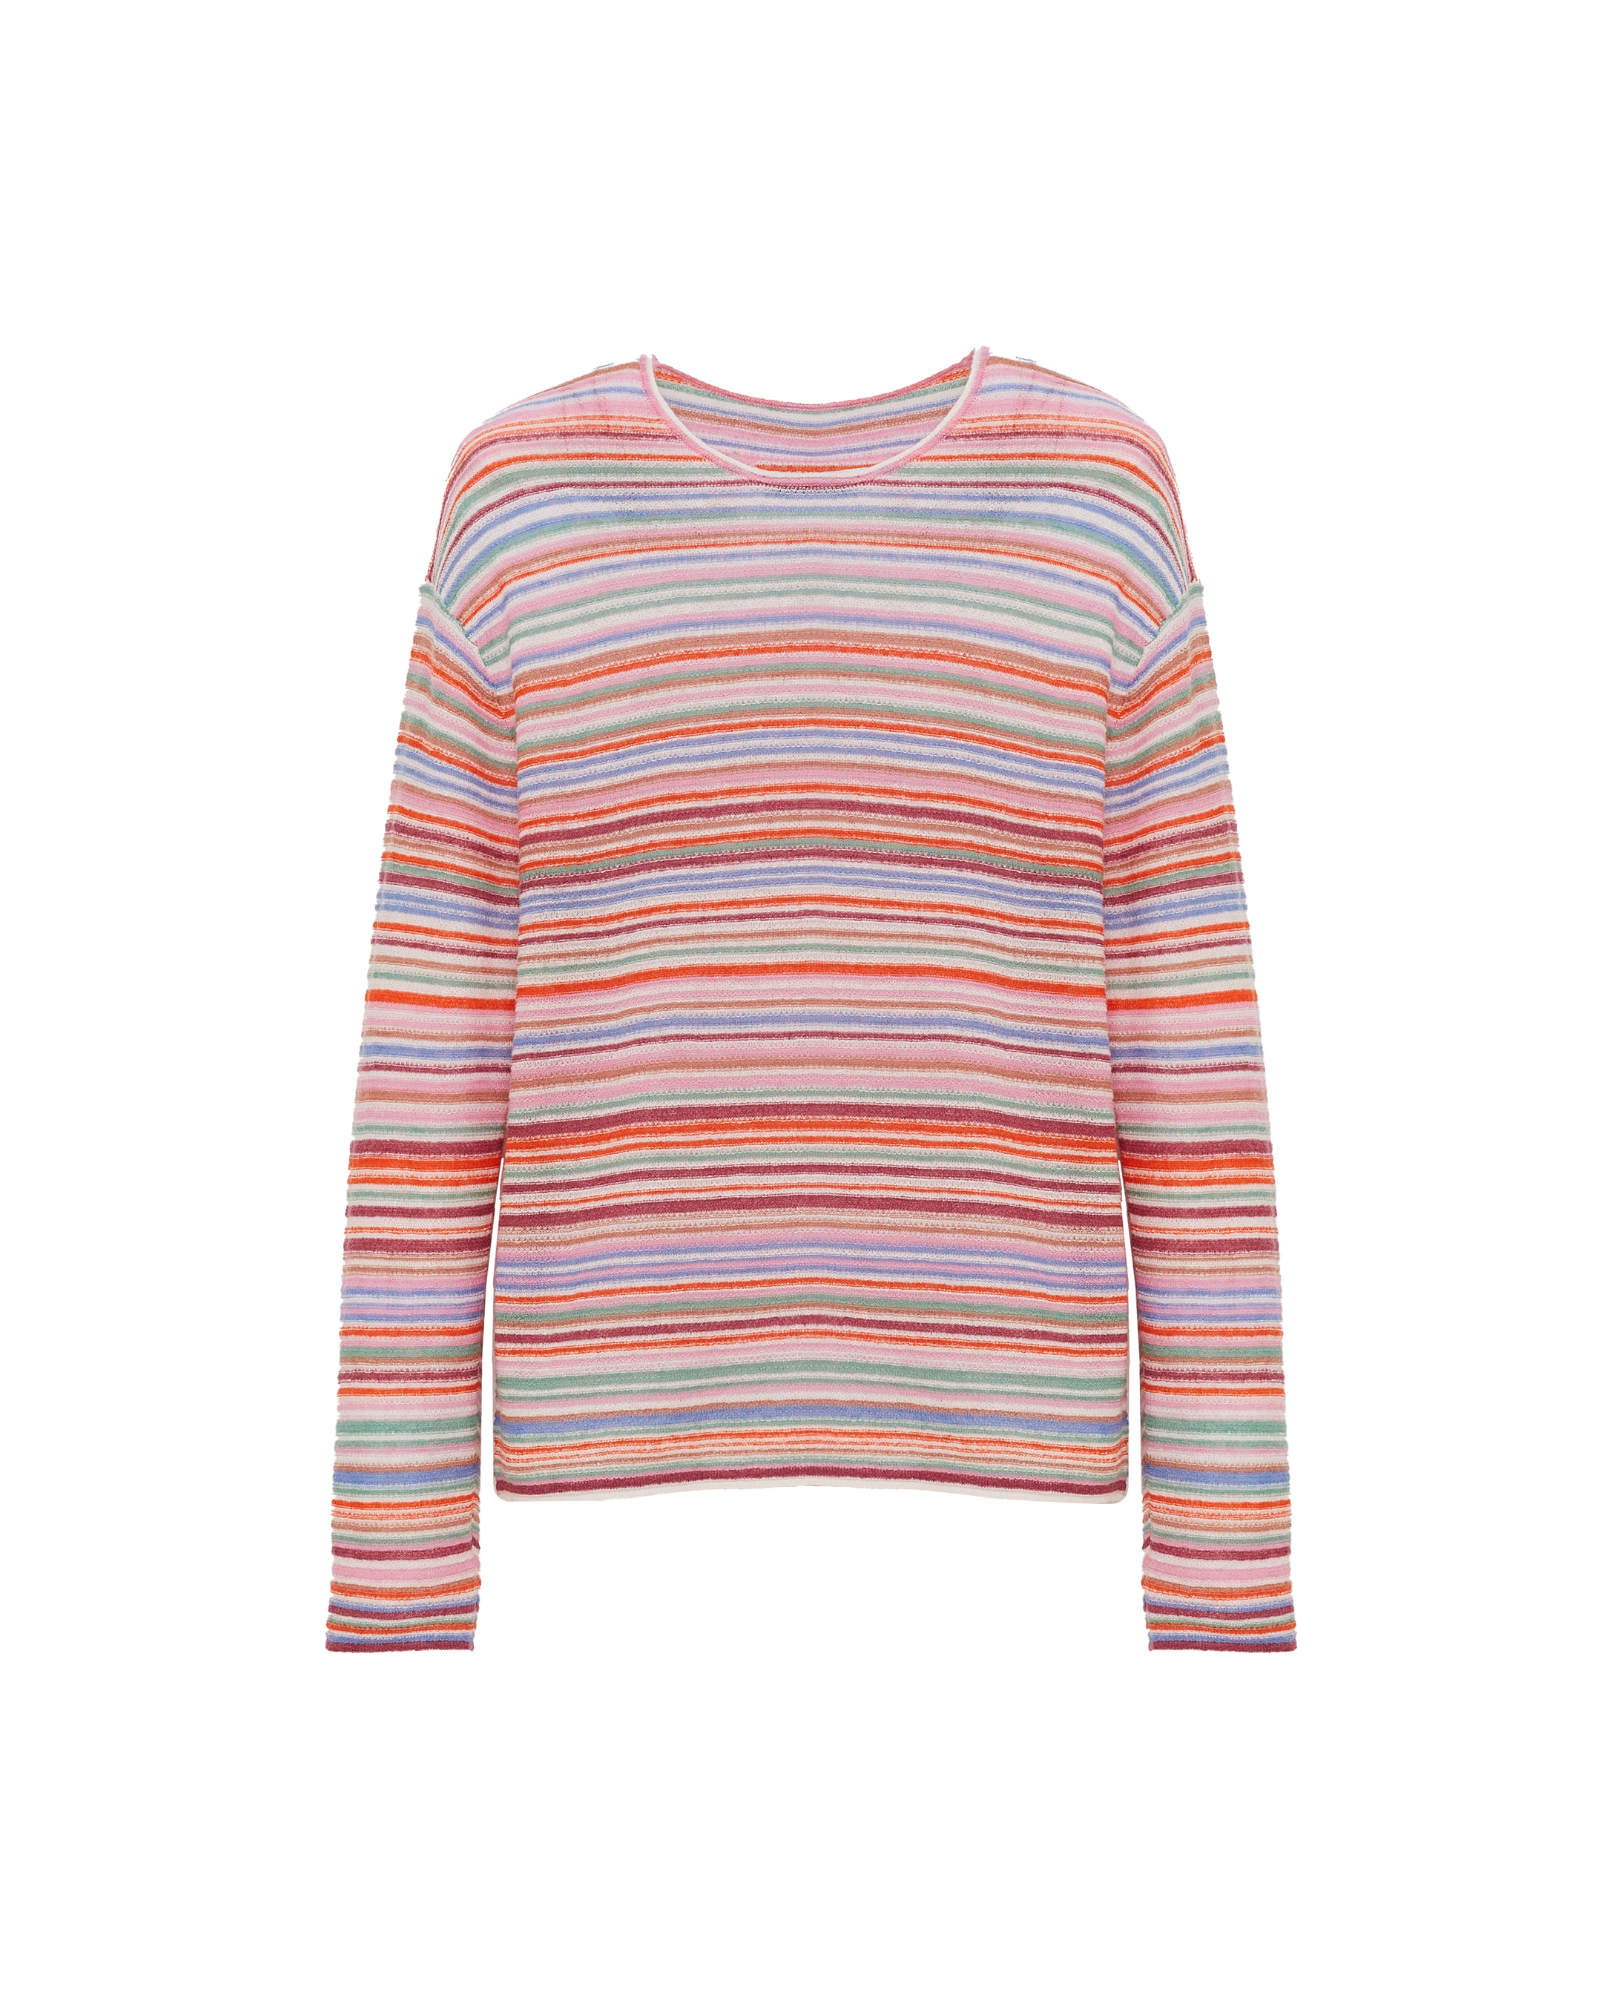 Dorothee Schumacher Striped Softness Pullover in Colorful Stripes